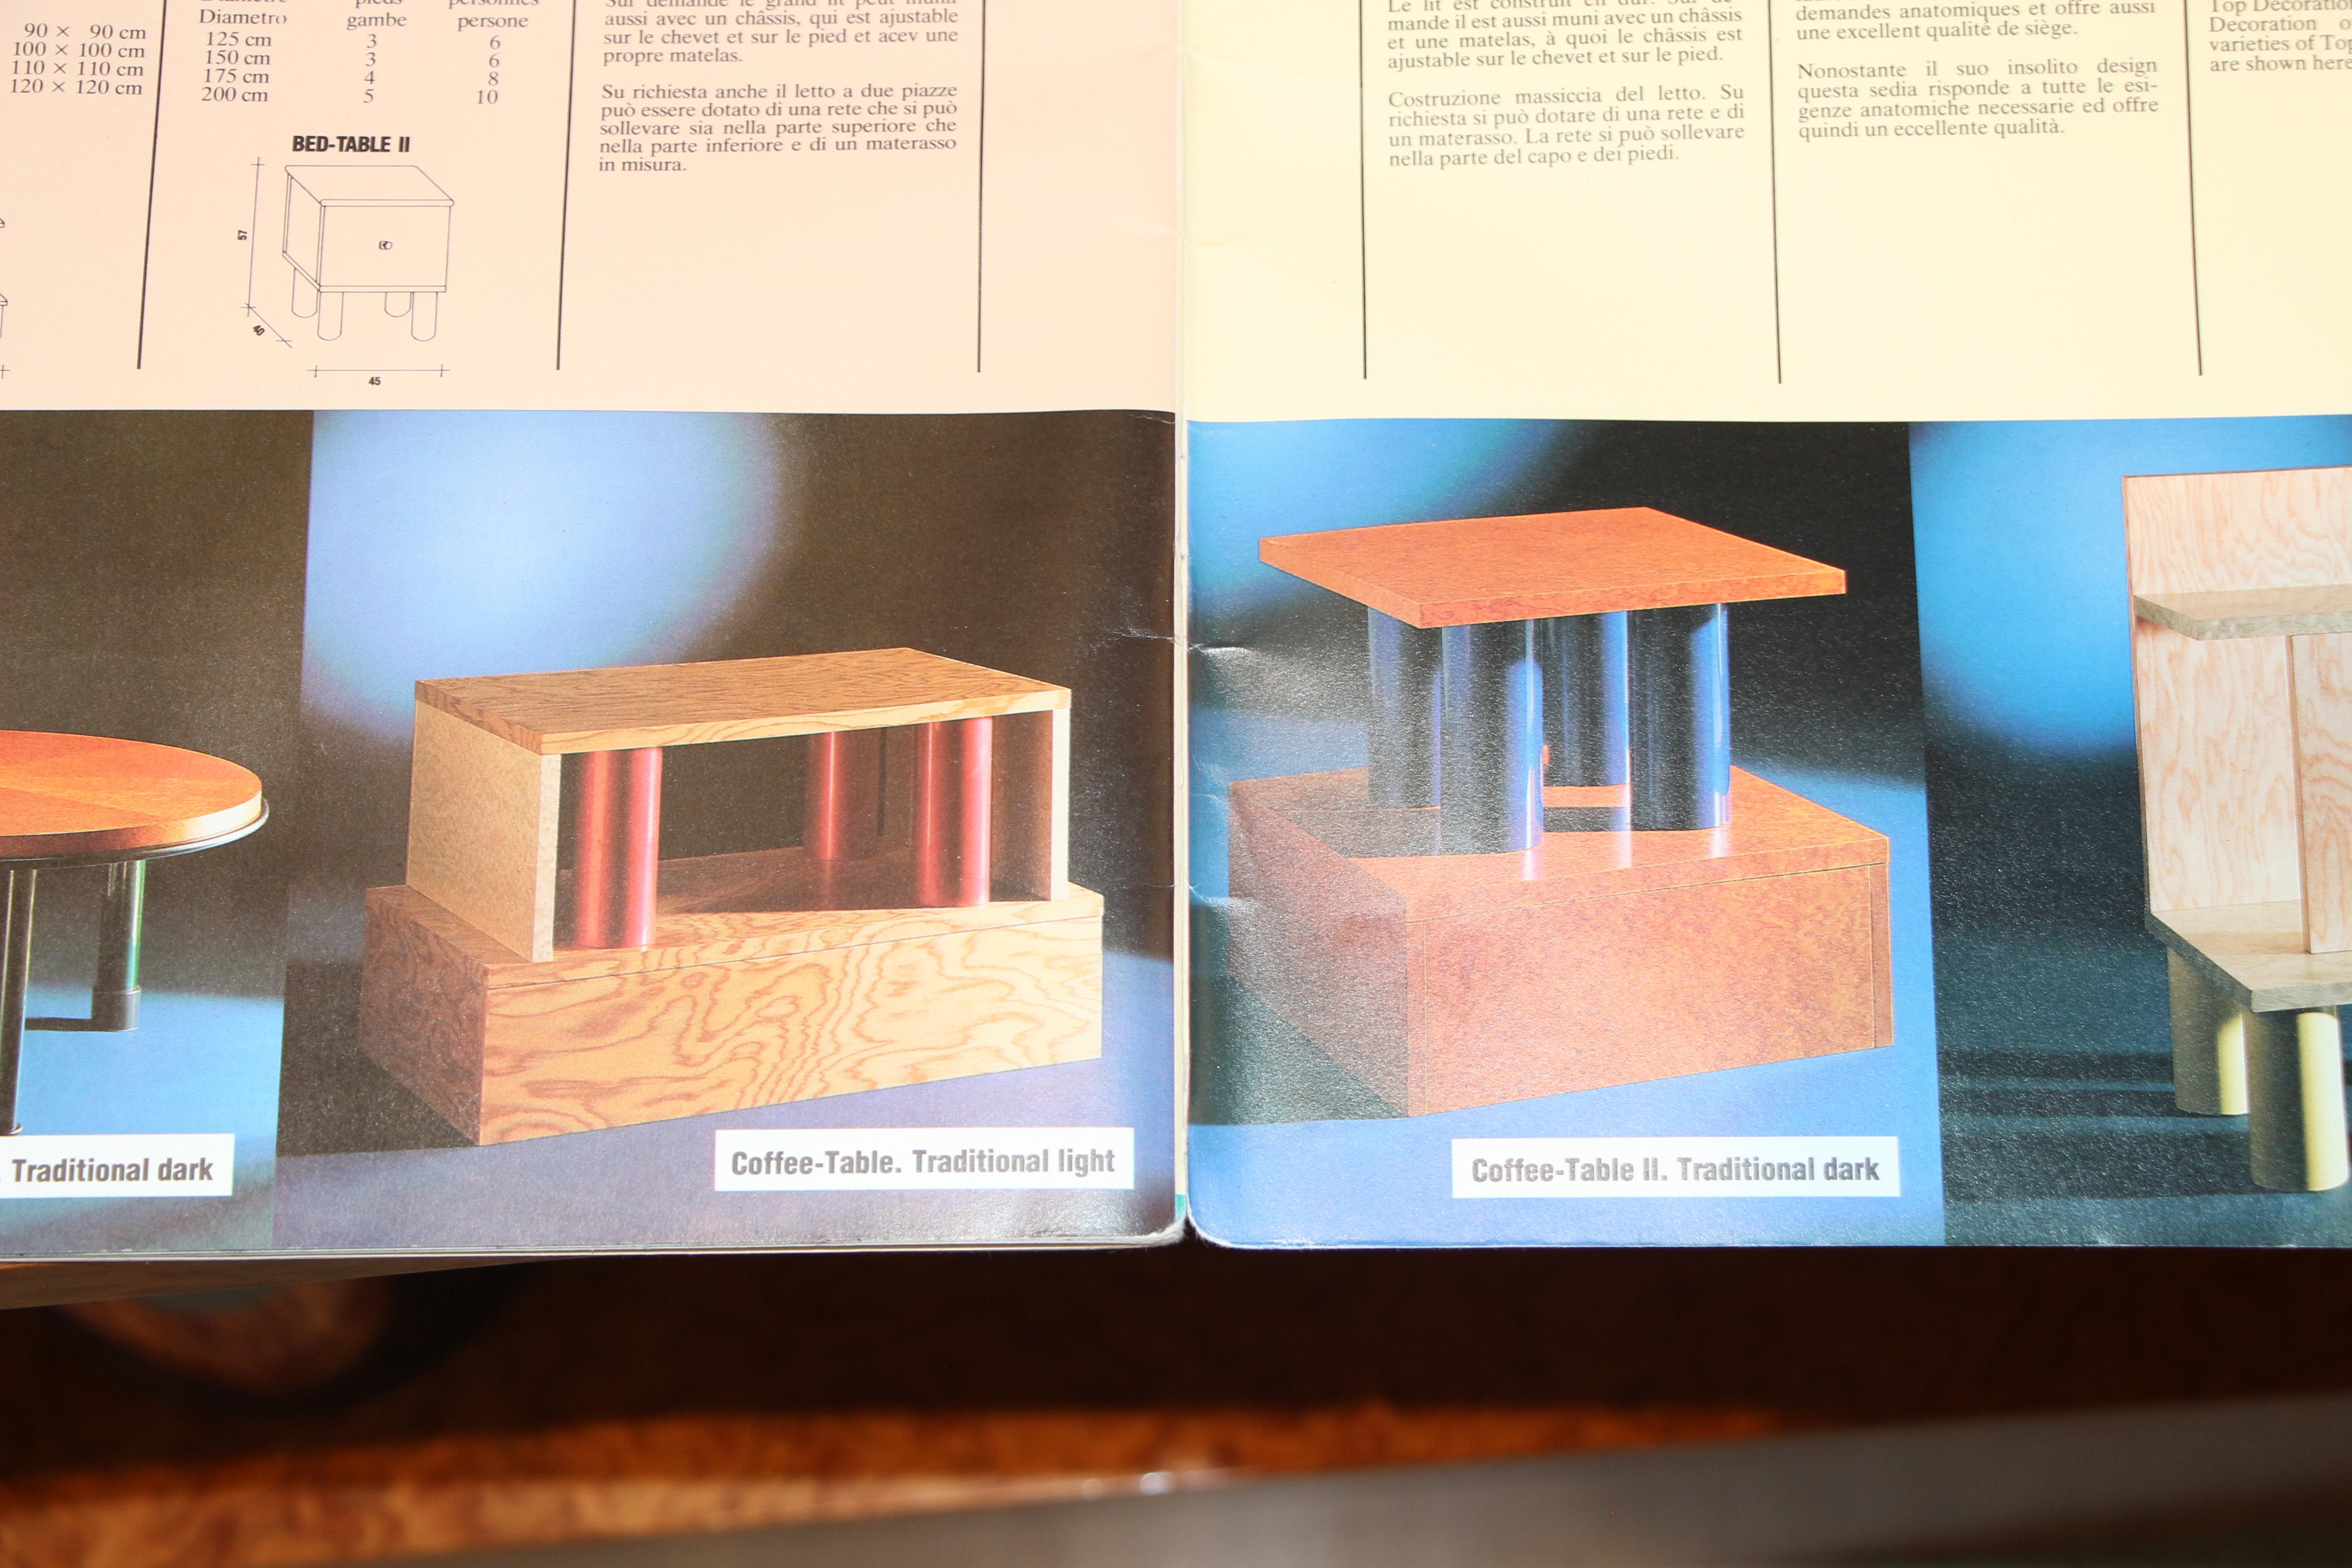 A collaboration between Marco Zanini and Ettore Sottsass for the Leitner Company produced this very Austrian looking furniture. I believe this dates to the 1980s specifically 1986 and we have the brochure that pictures the pieces. The three pieces